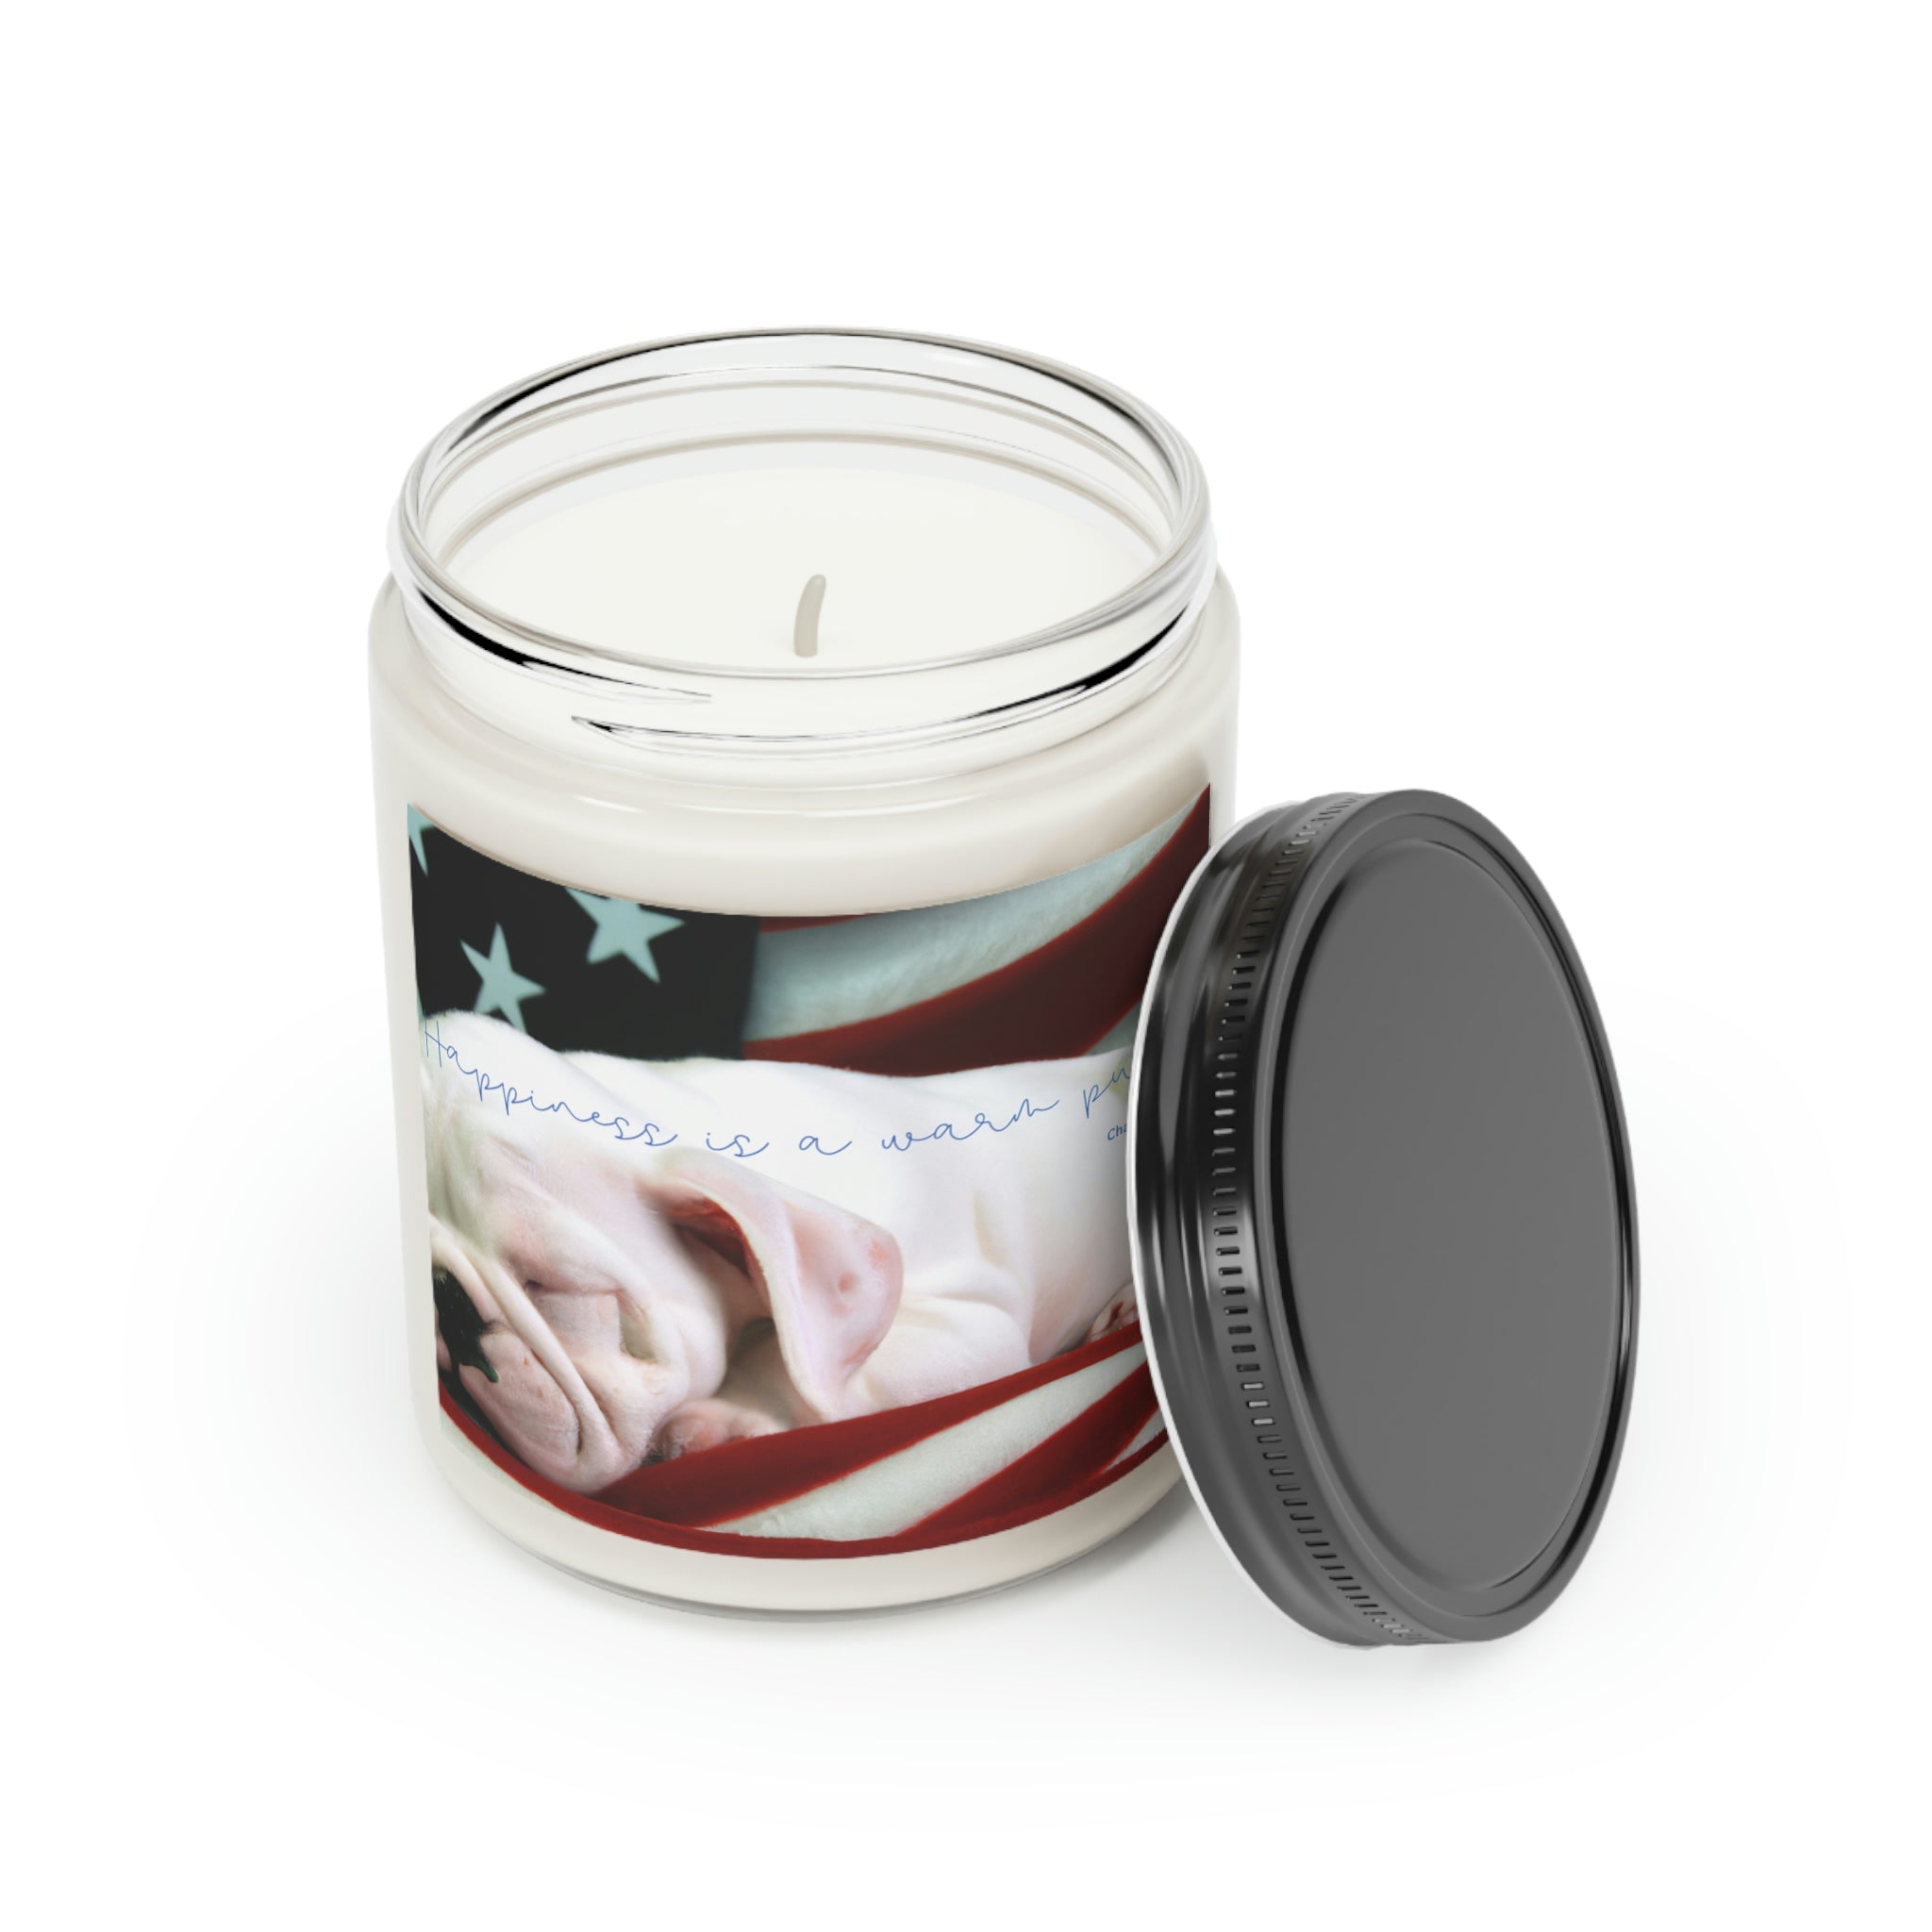 "Happiness is a Warm Puppy" - Scented Soy Candle - 50 hour